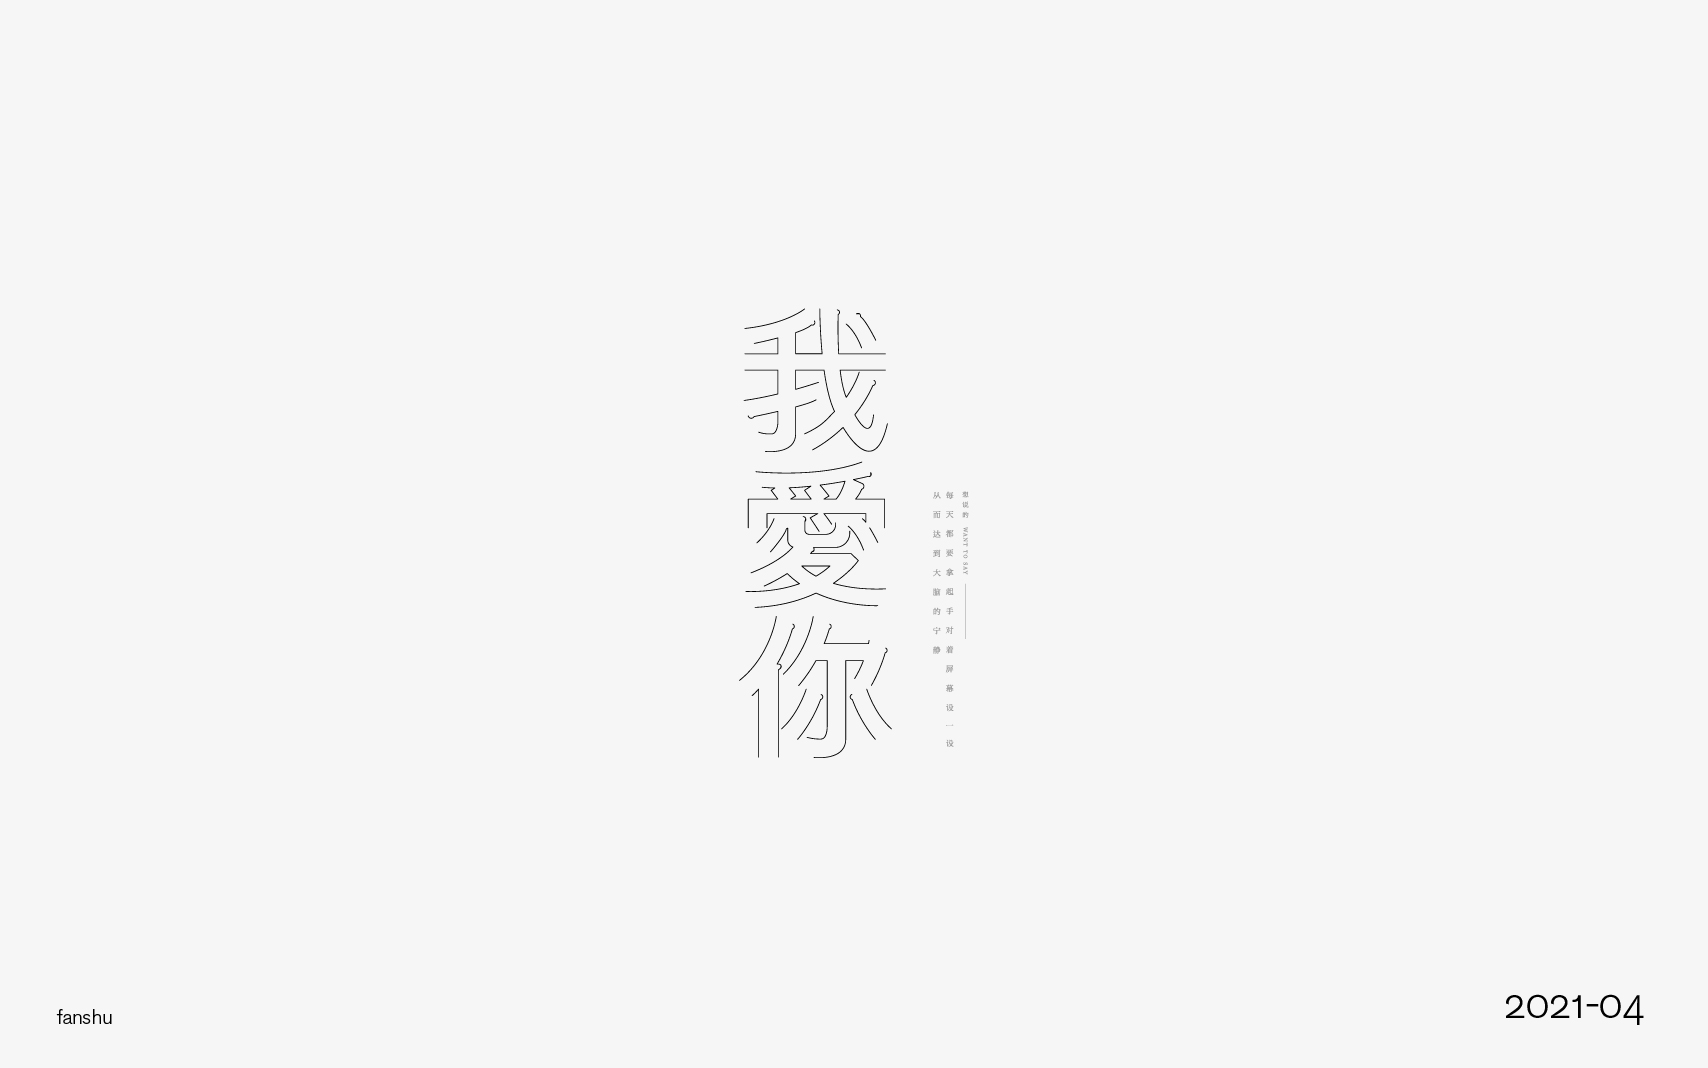 19P Collection of the latest Chinese font design schemes in 2021 #.18